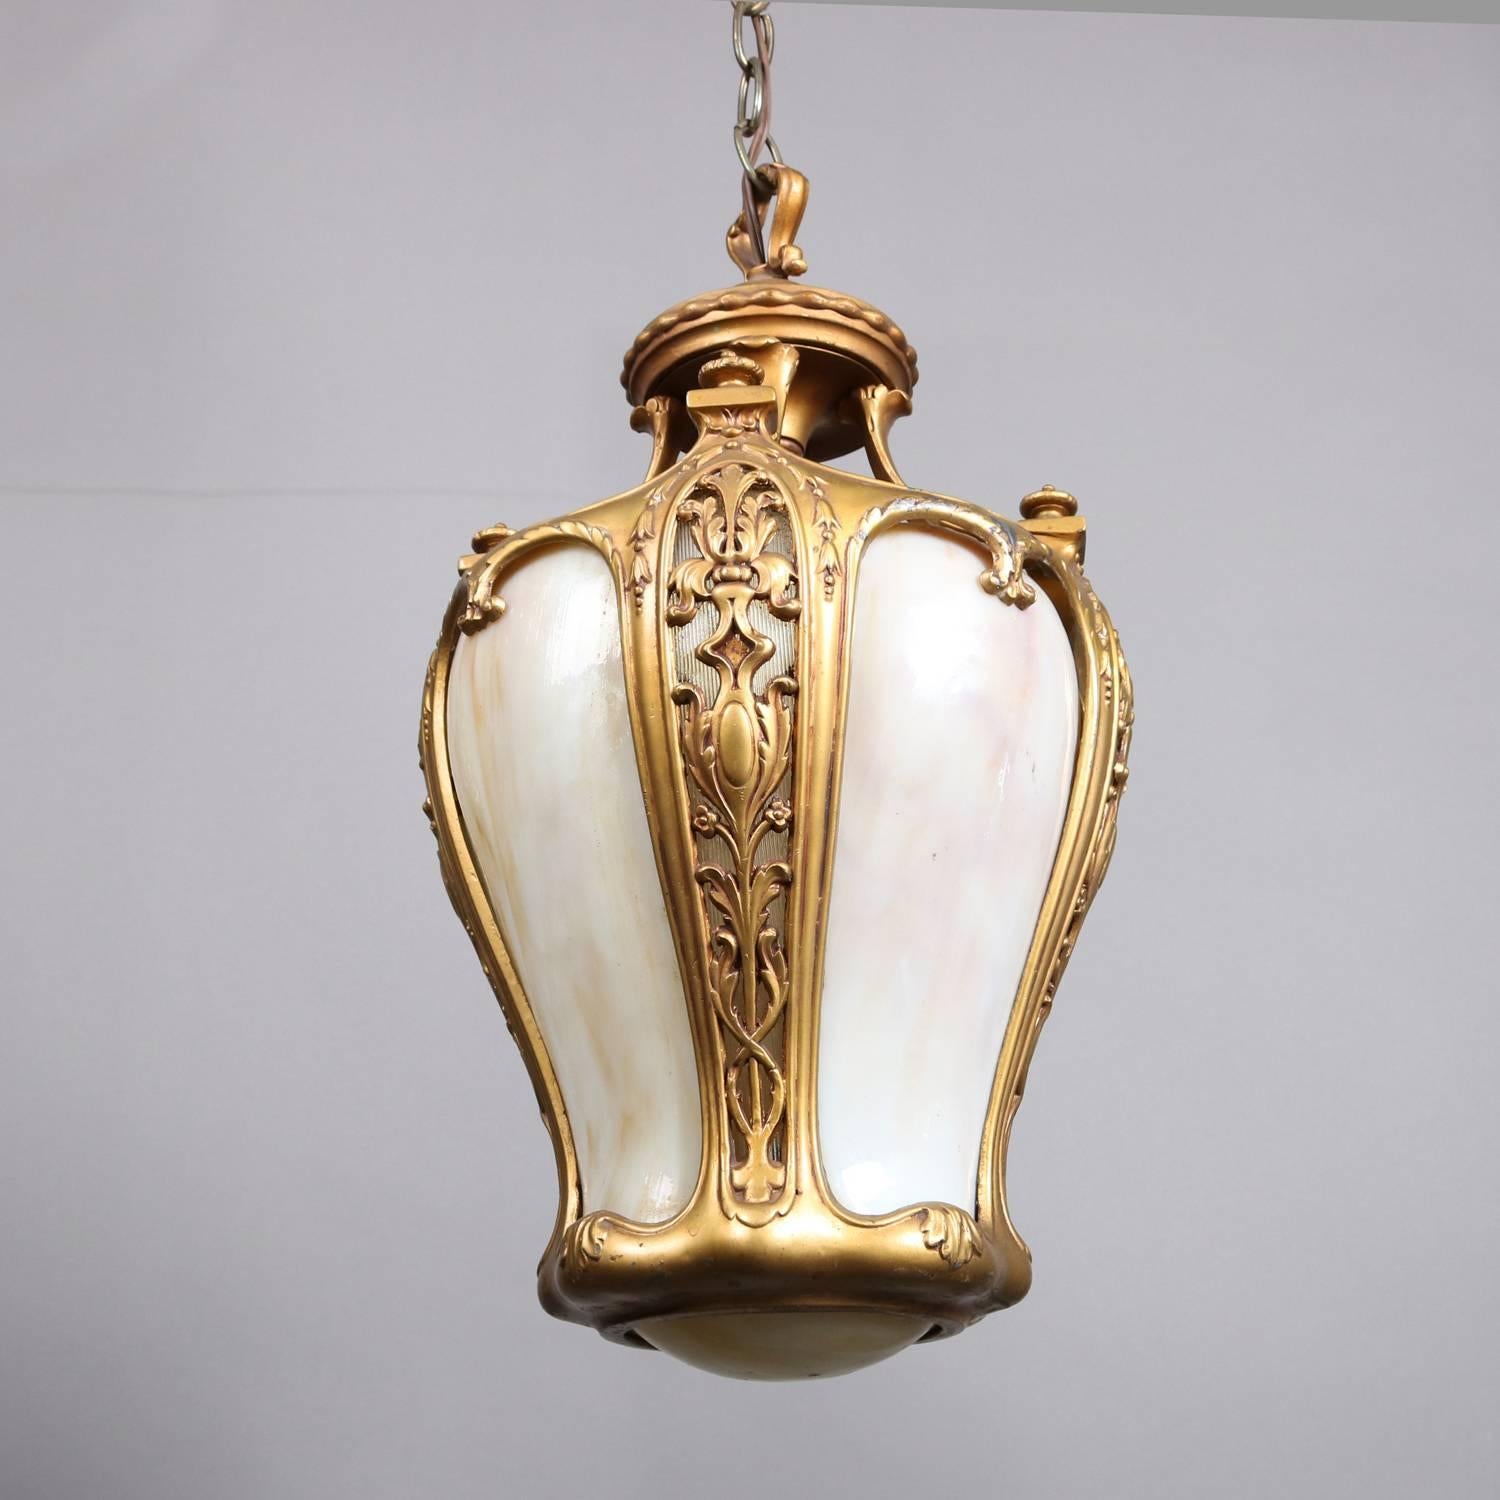 Neoclassical hanging pendant light features pierced foliate and scroll gilt frame with slag glass panels, 20th century

Measures: 33